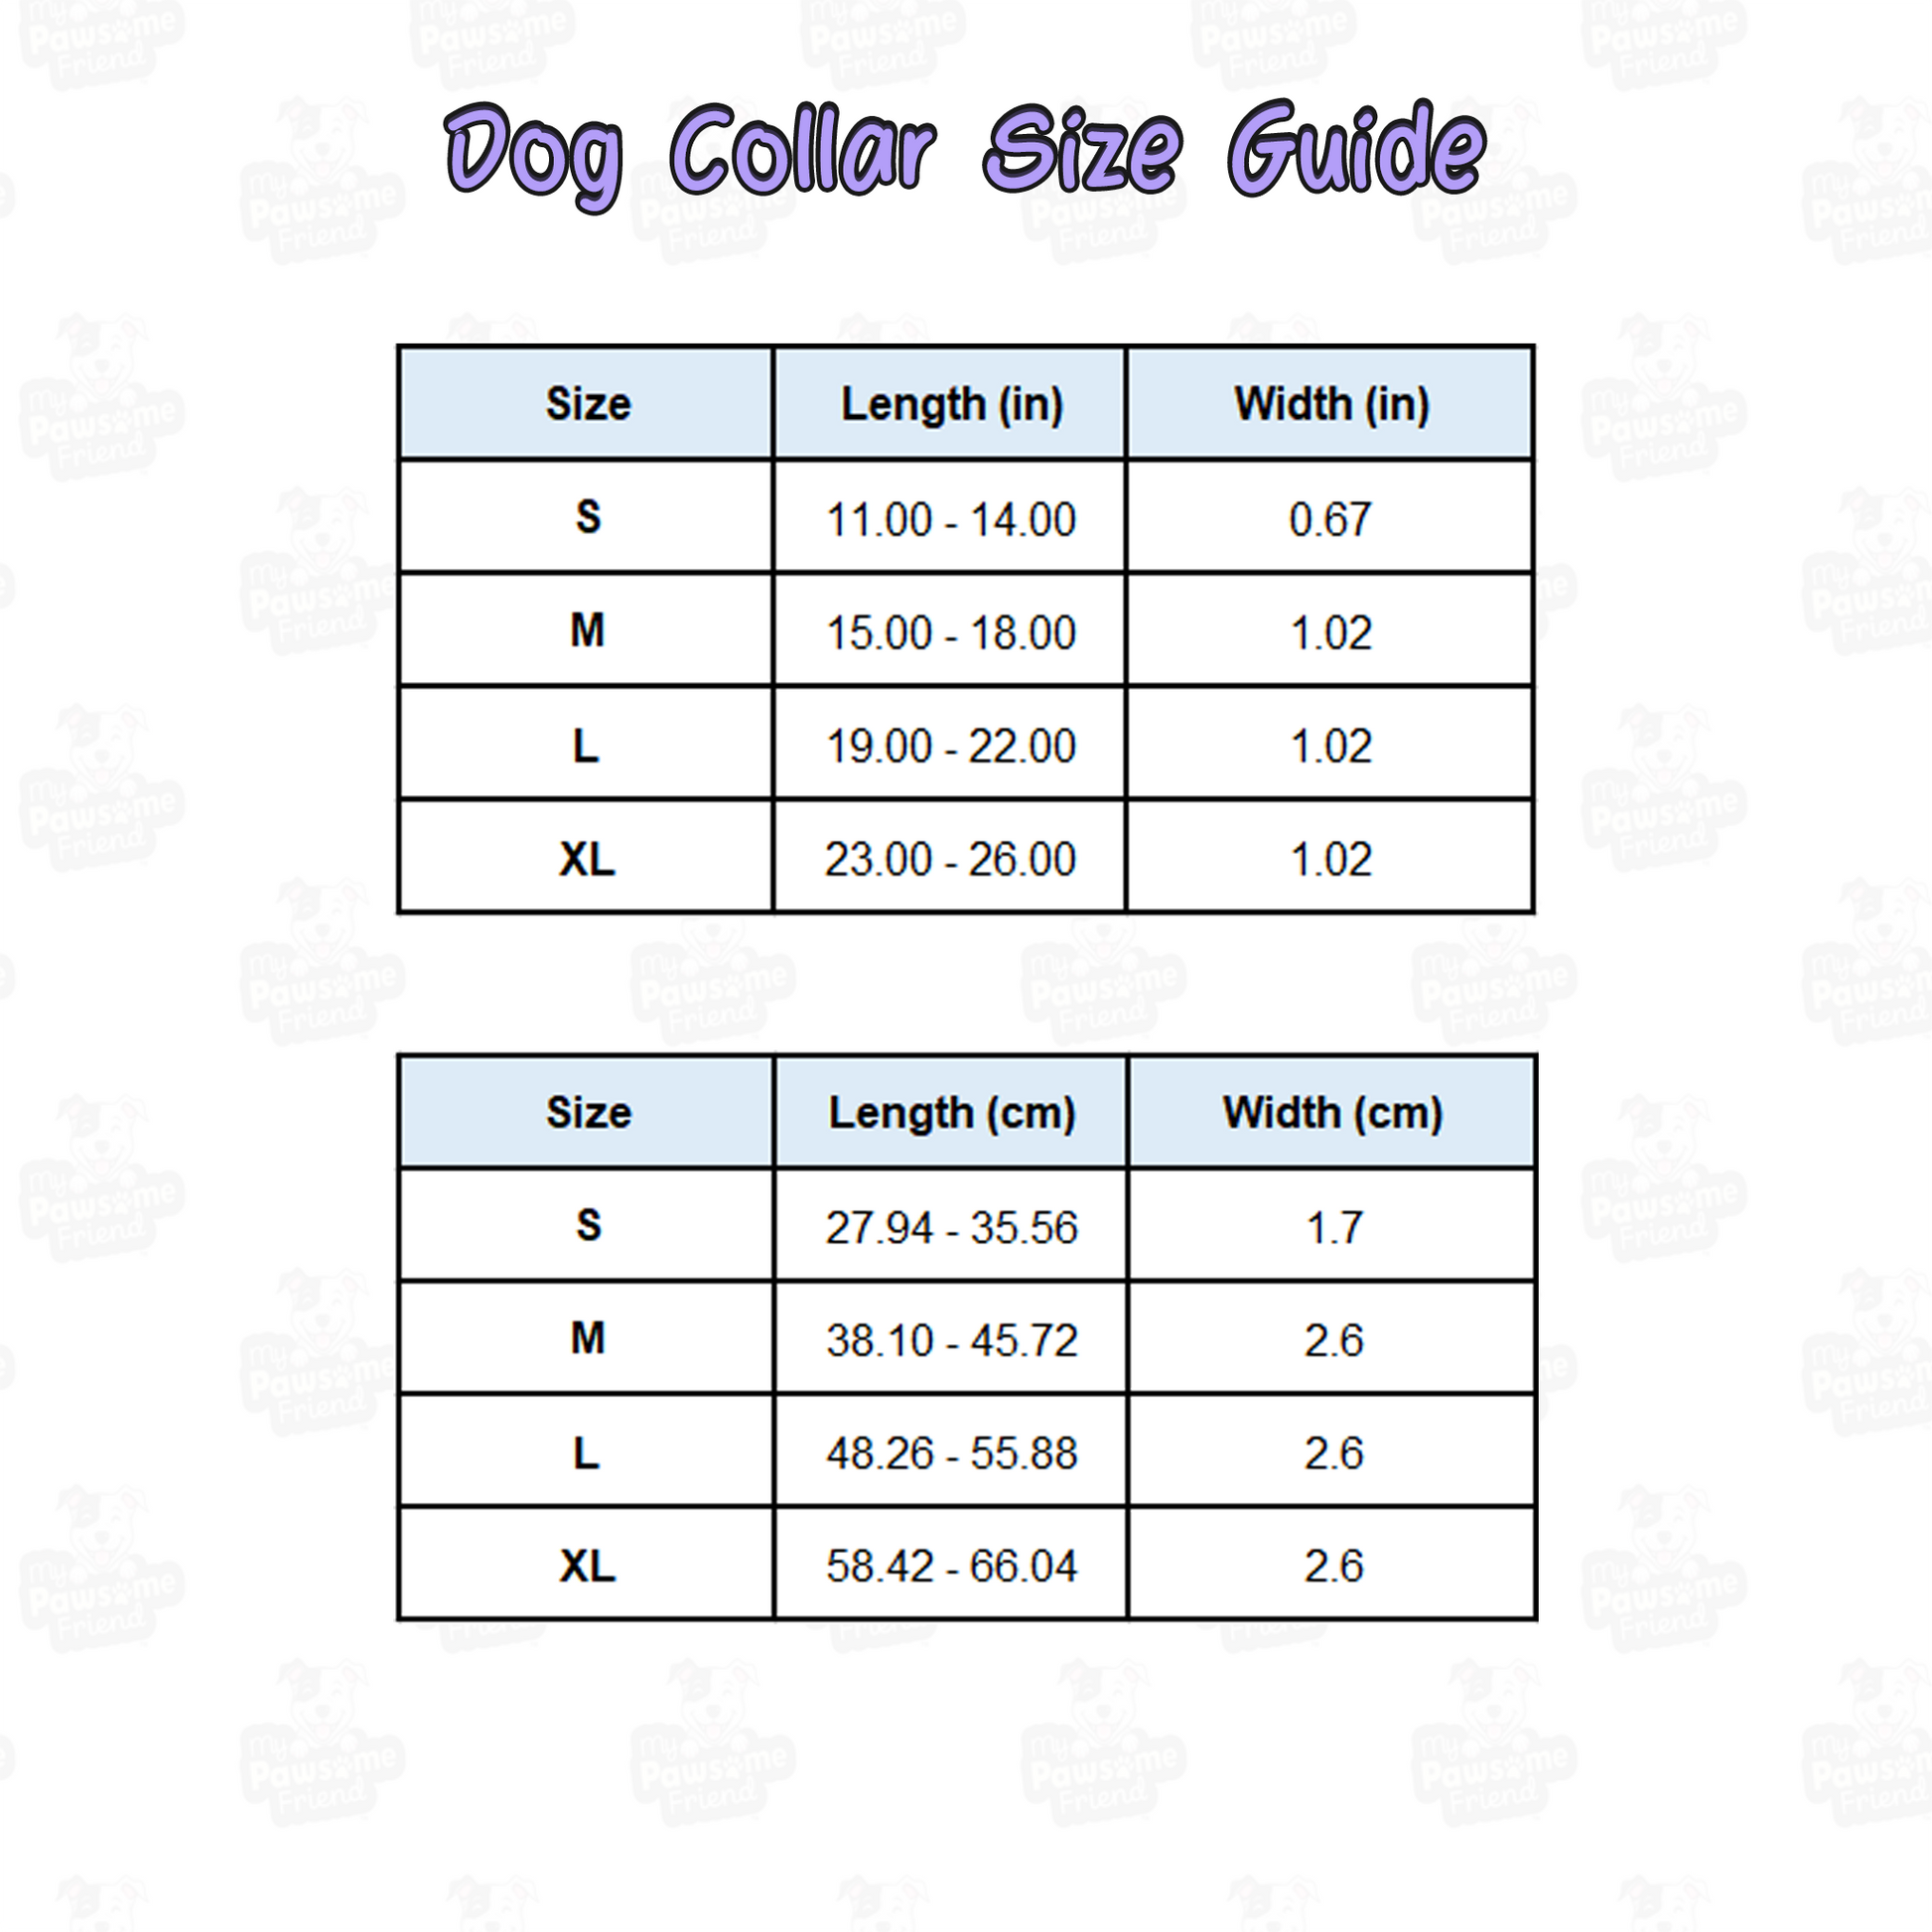 size chart for a dog collar with a beautiful hearts pattern design and the dog's name in the middle of the collar